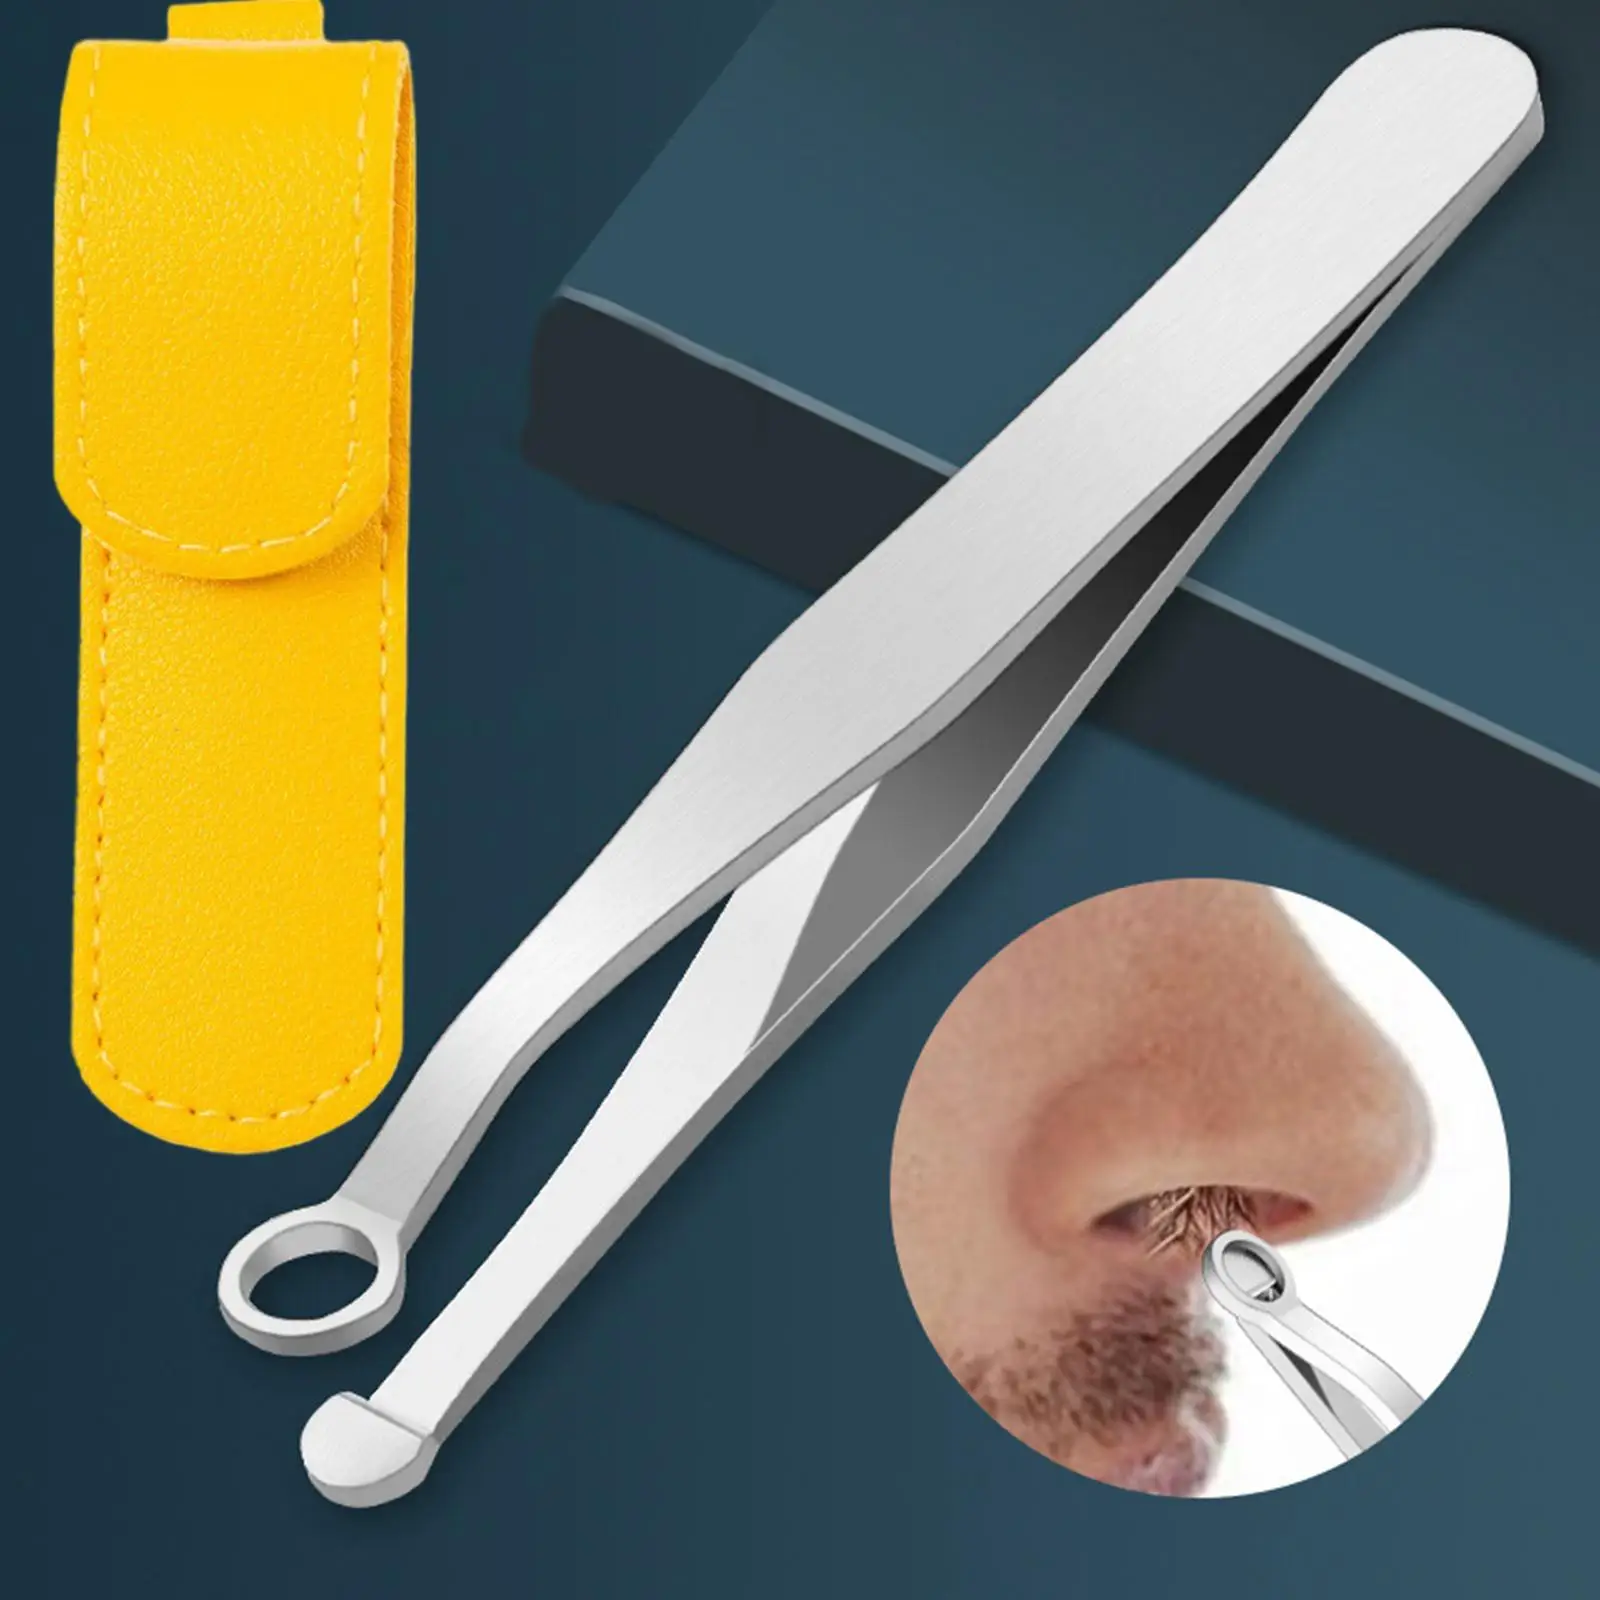 Nose Hair Tweezers Trimming Tool Stainless Steel Eyebrow Trimmer Nose Hair Cut Manicure Facial Trimming Makeup Scissors